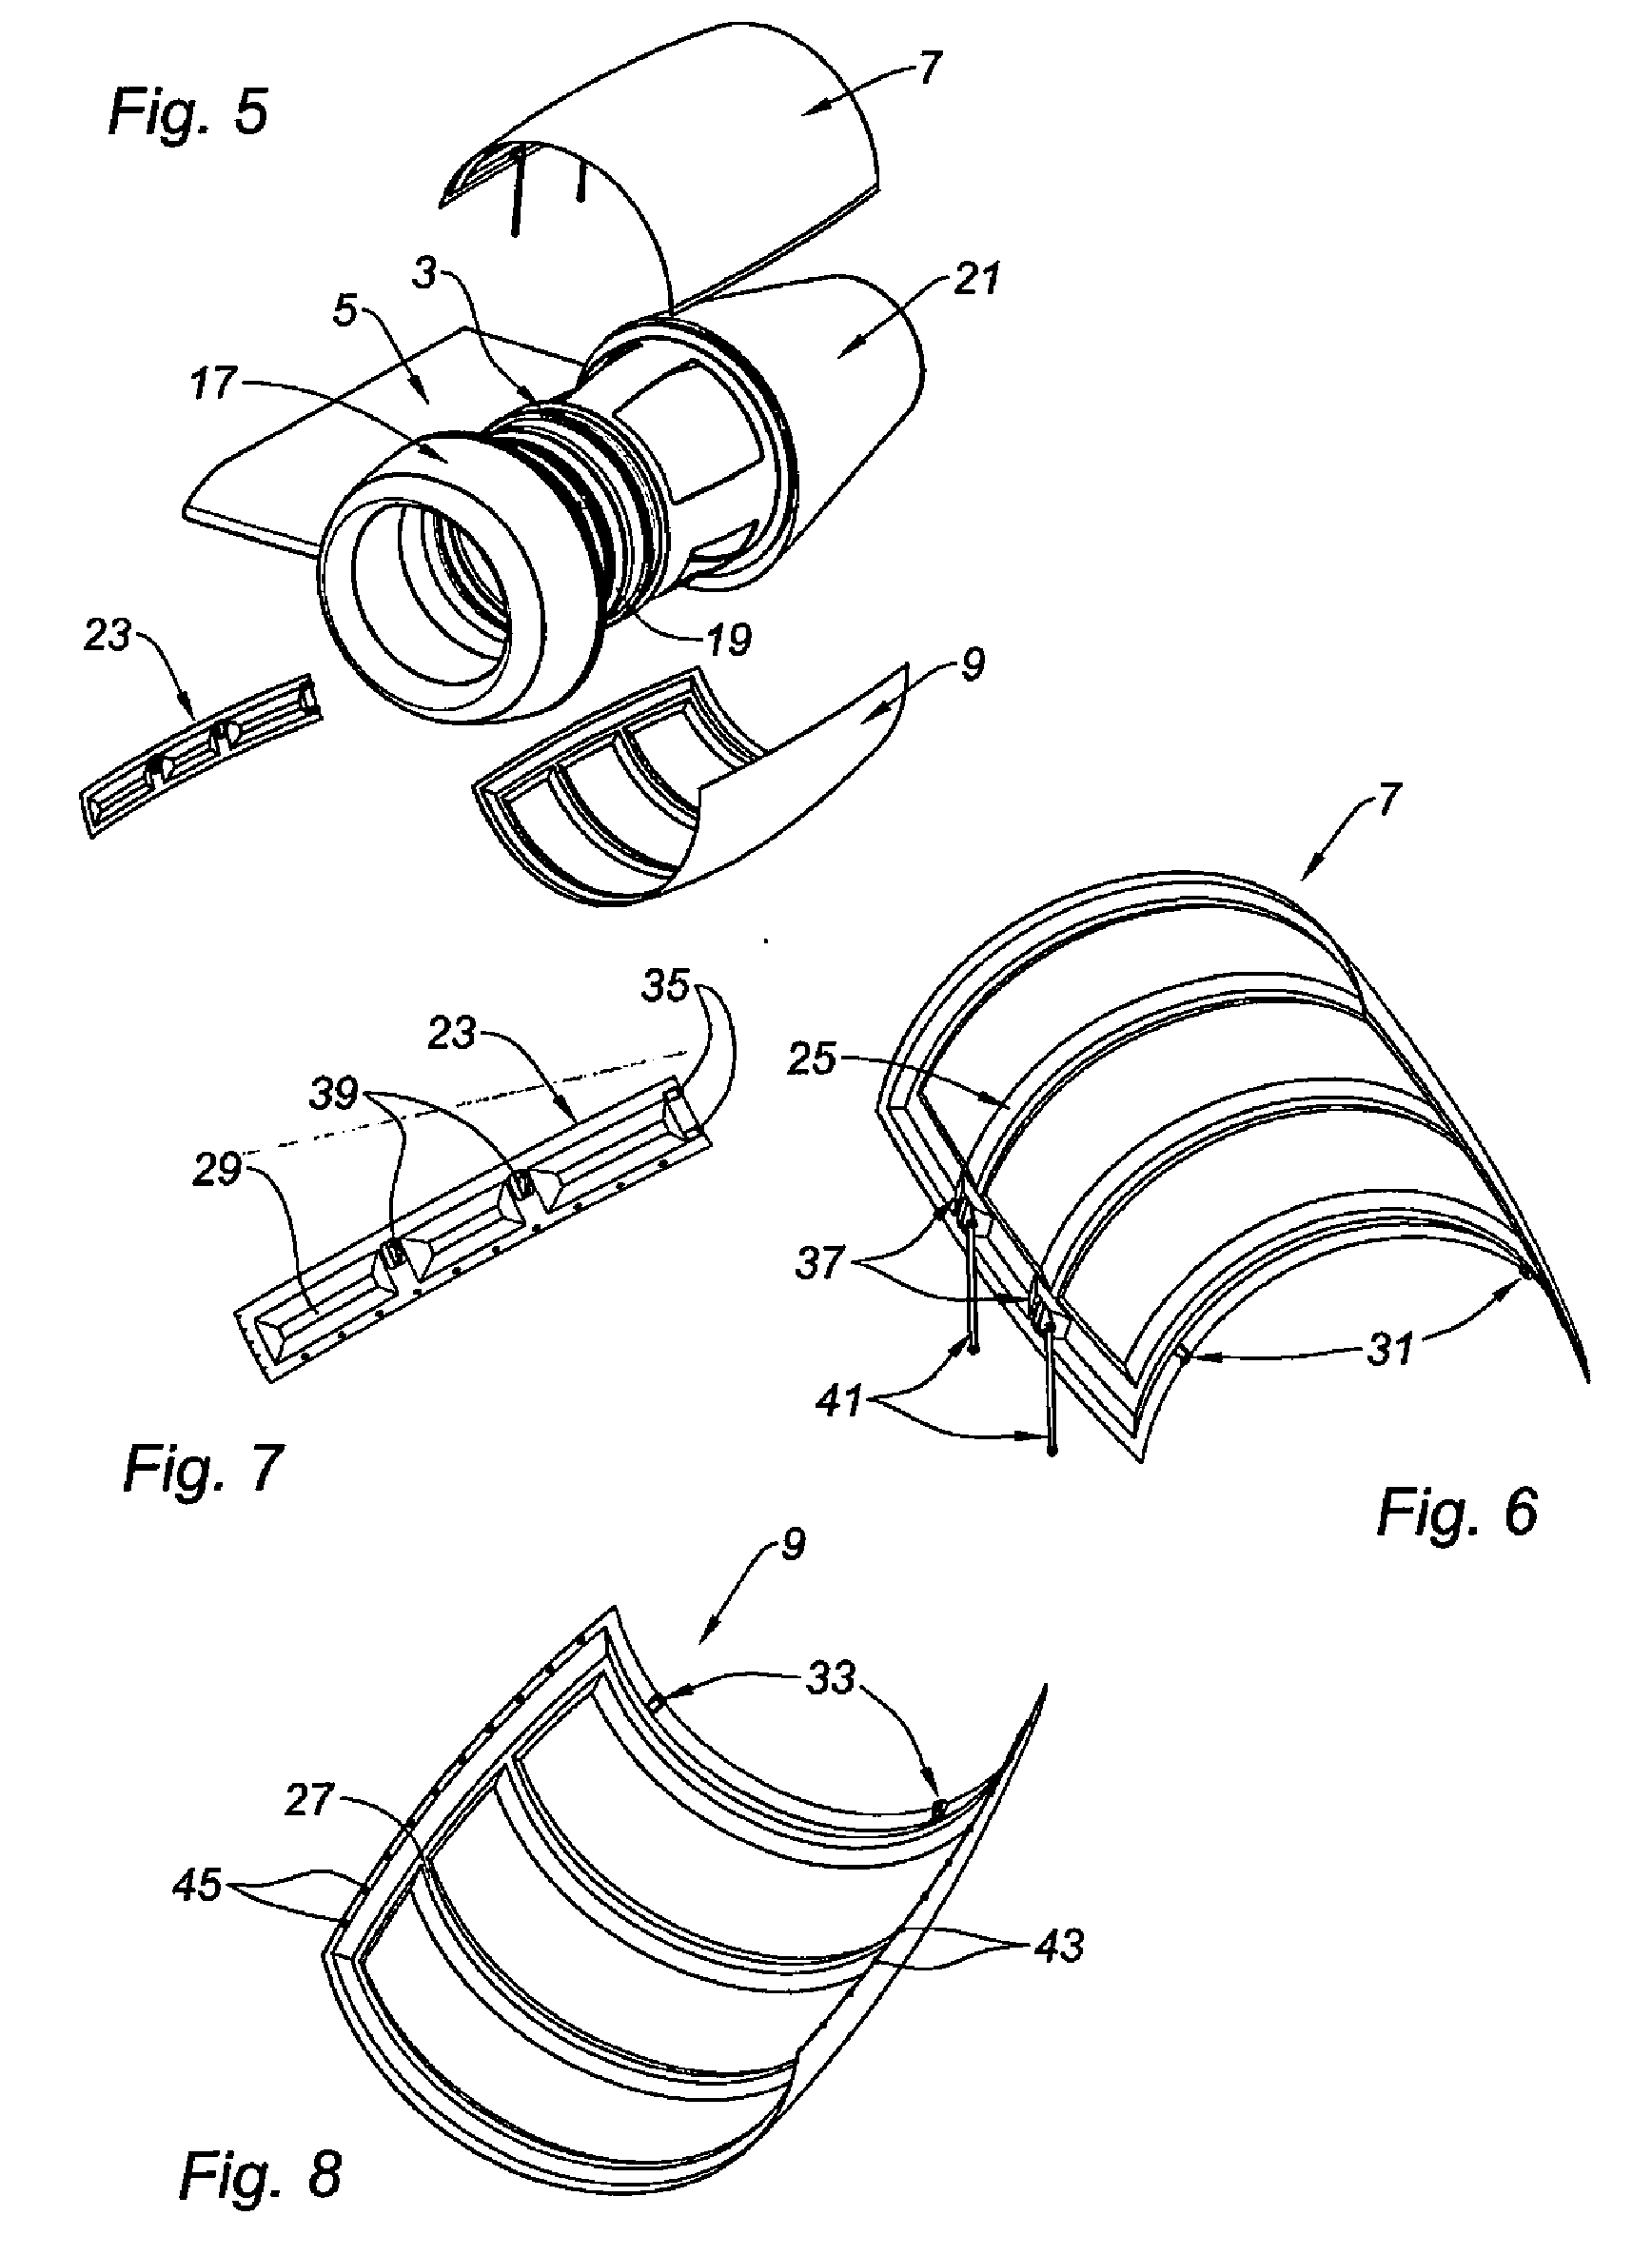 Nacelle with simplified cowling arrangement